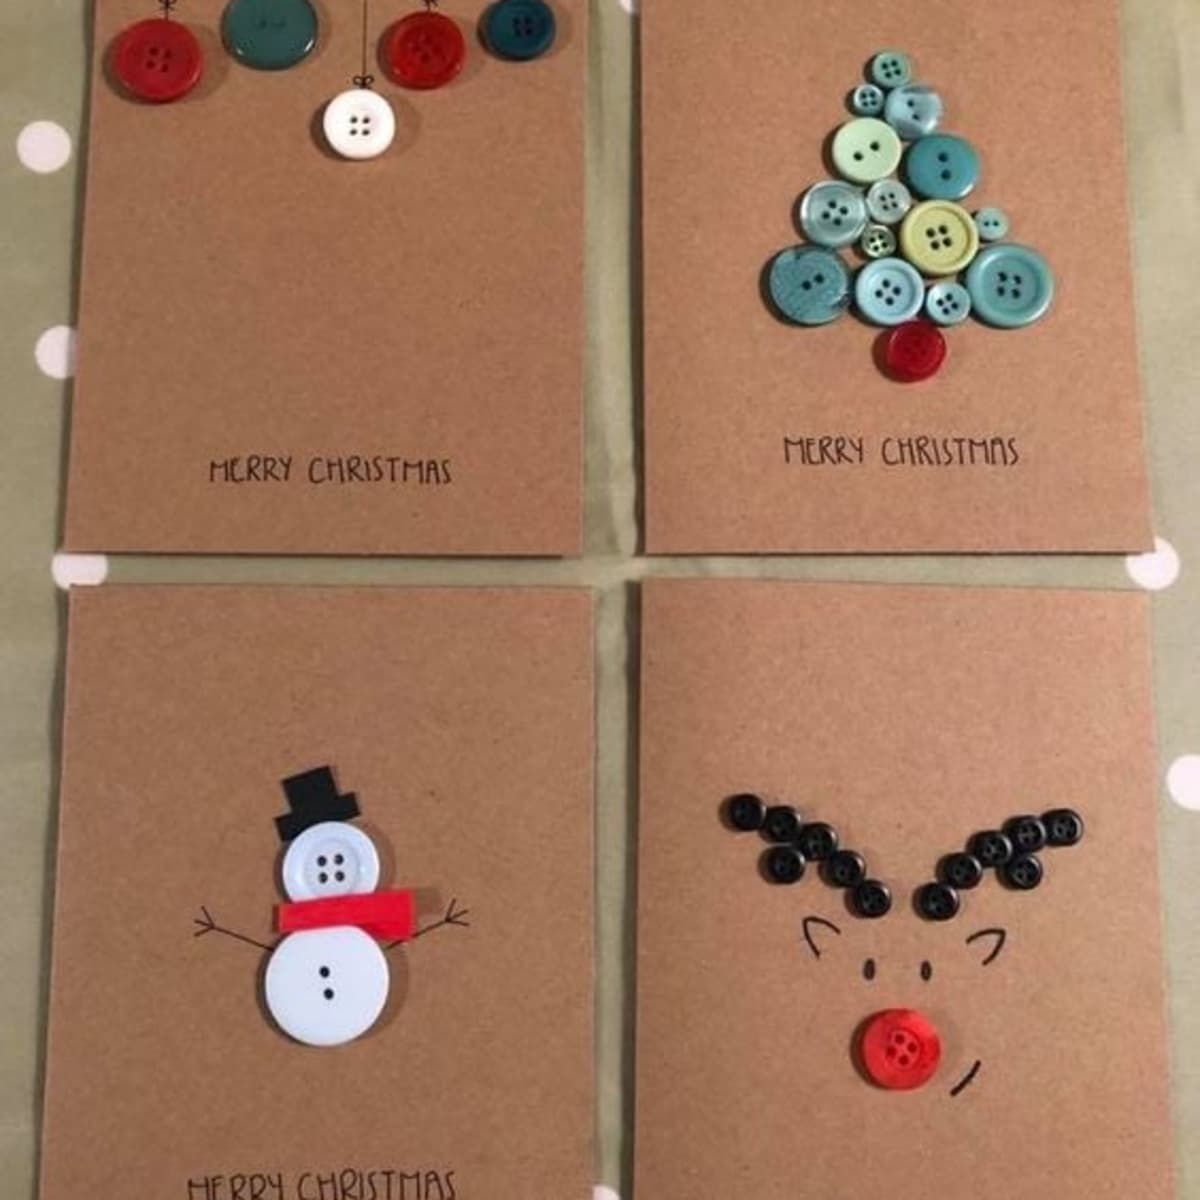 Festive Winter Crafts for Seniors to Add Holiday Cheer